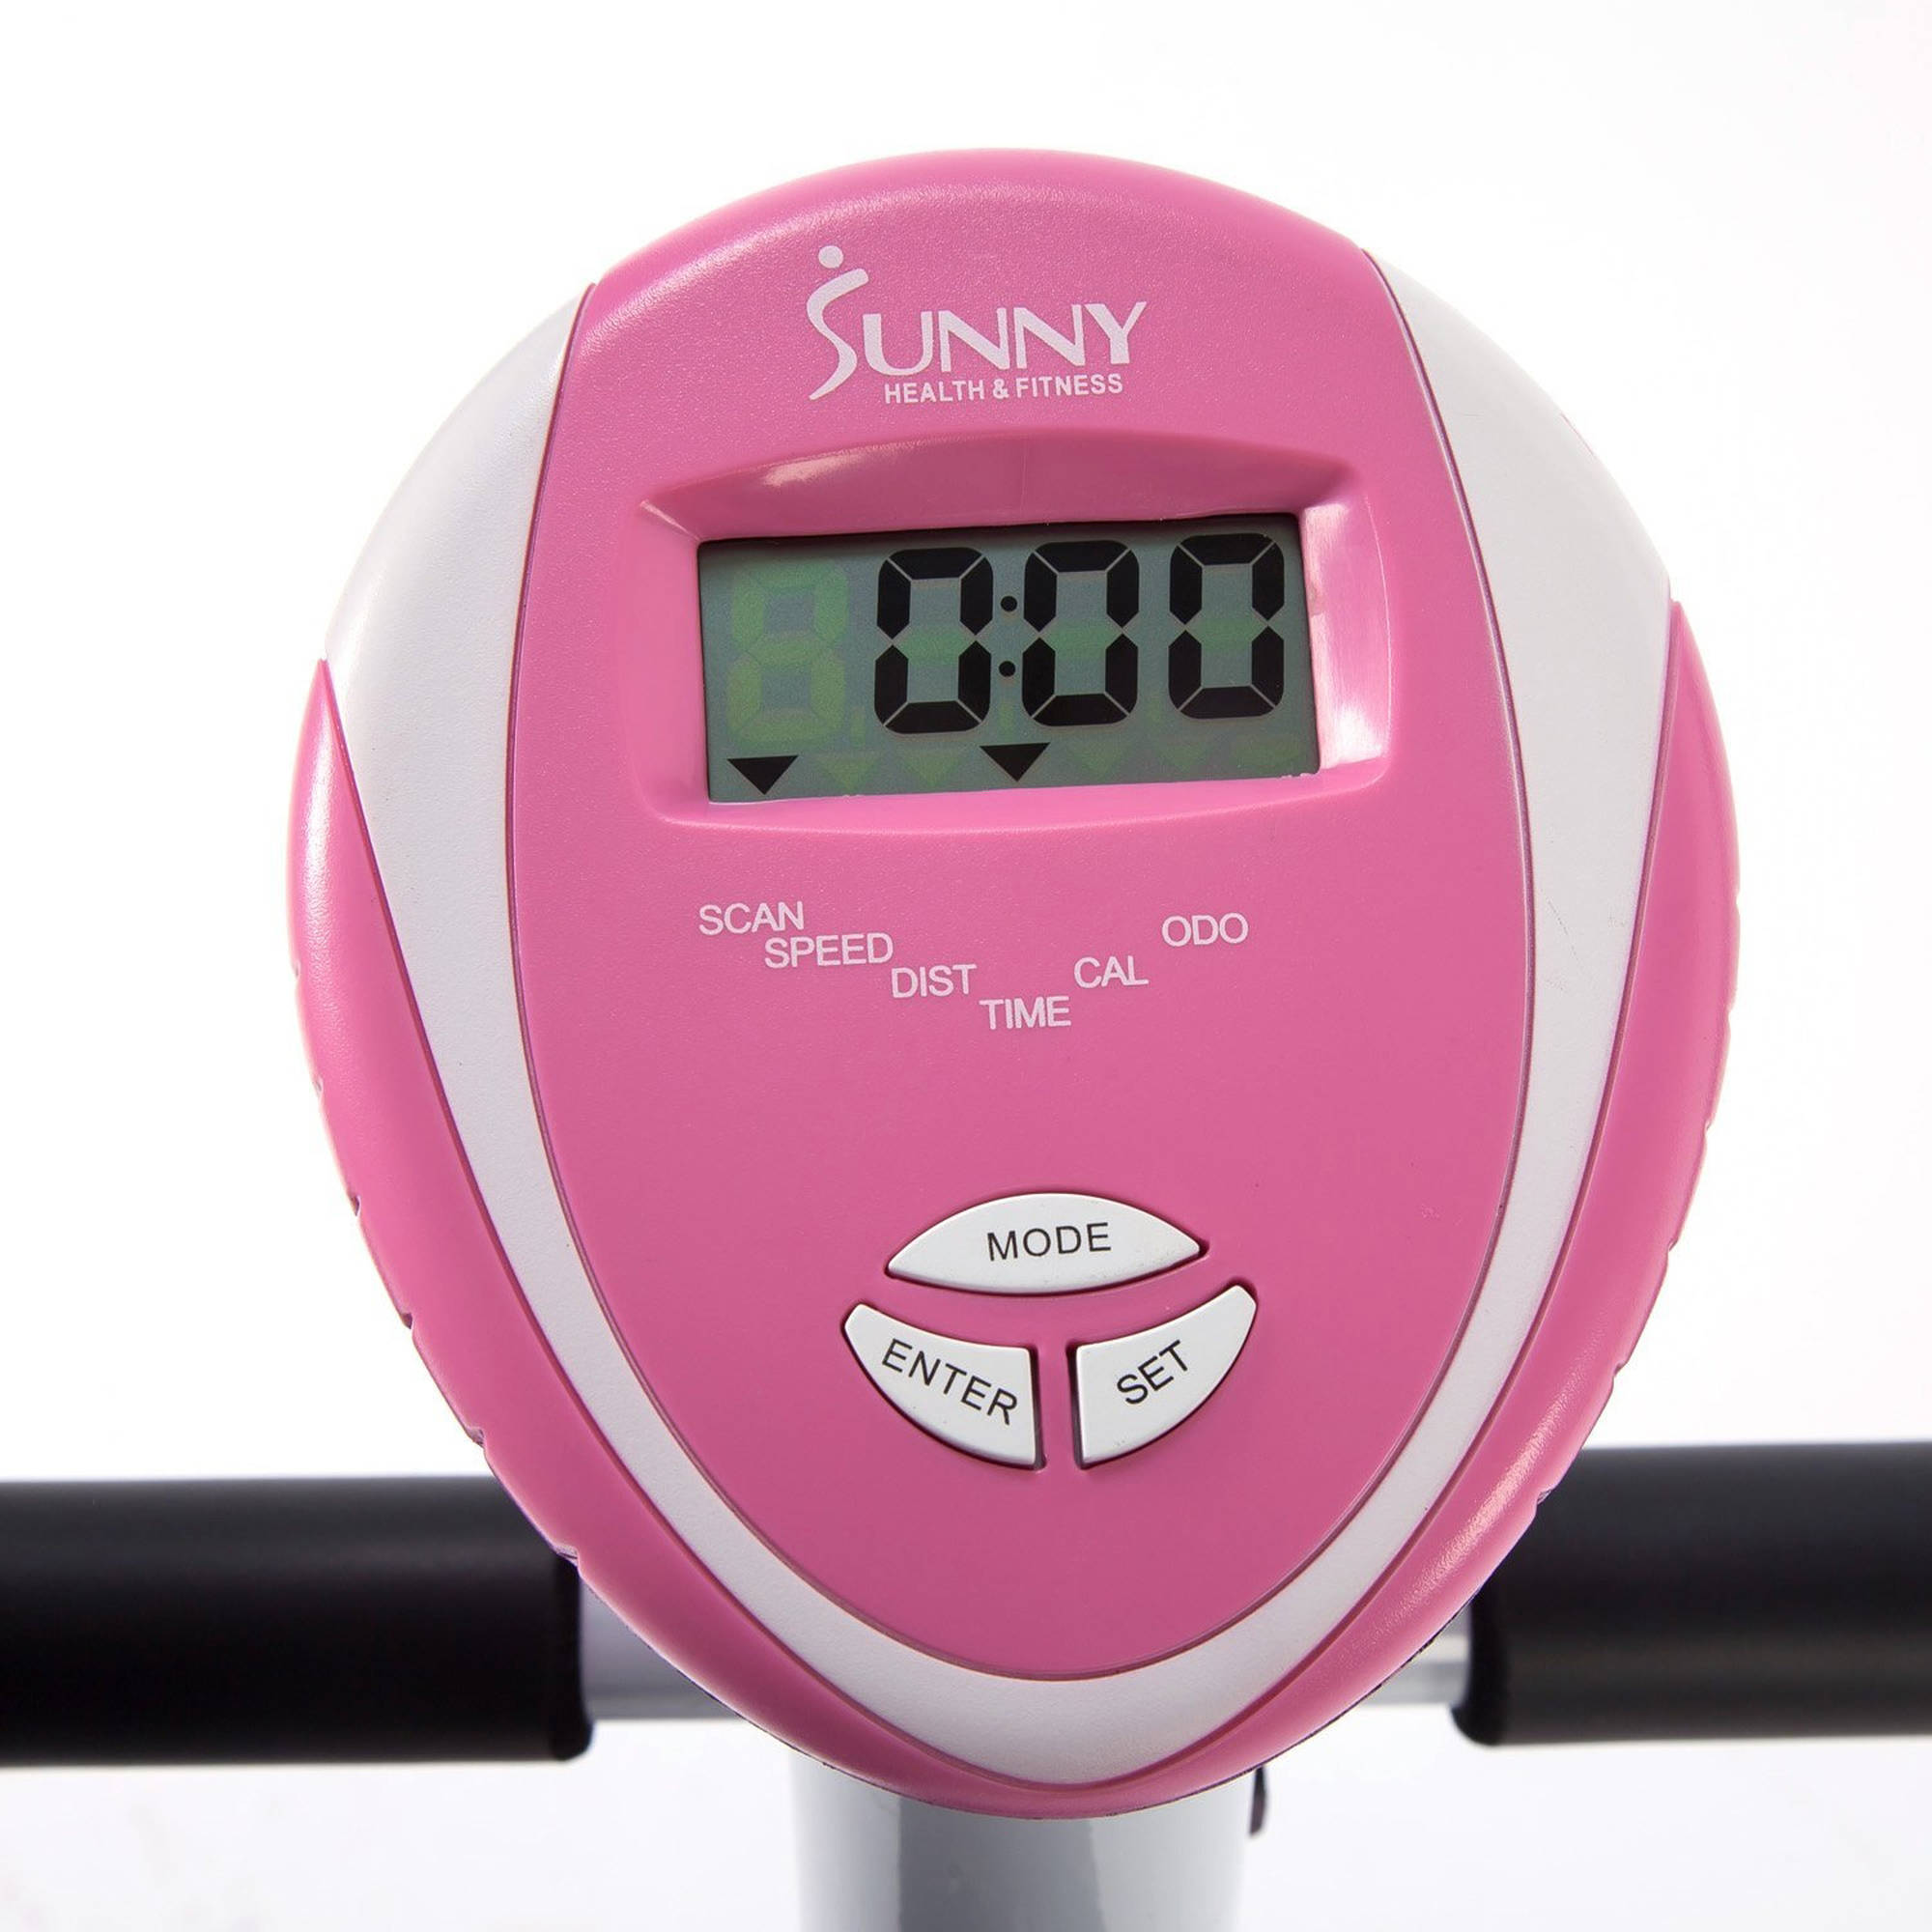 Sunny Health & Fitness P8200 Pink Magnetic Upright Exercise Bike - image 4 of 7